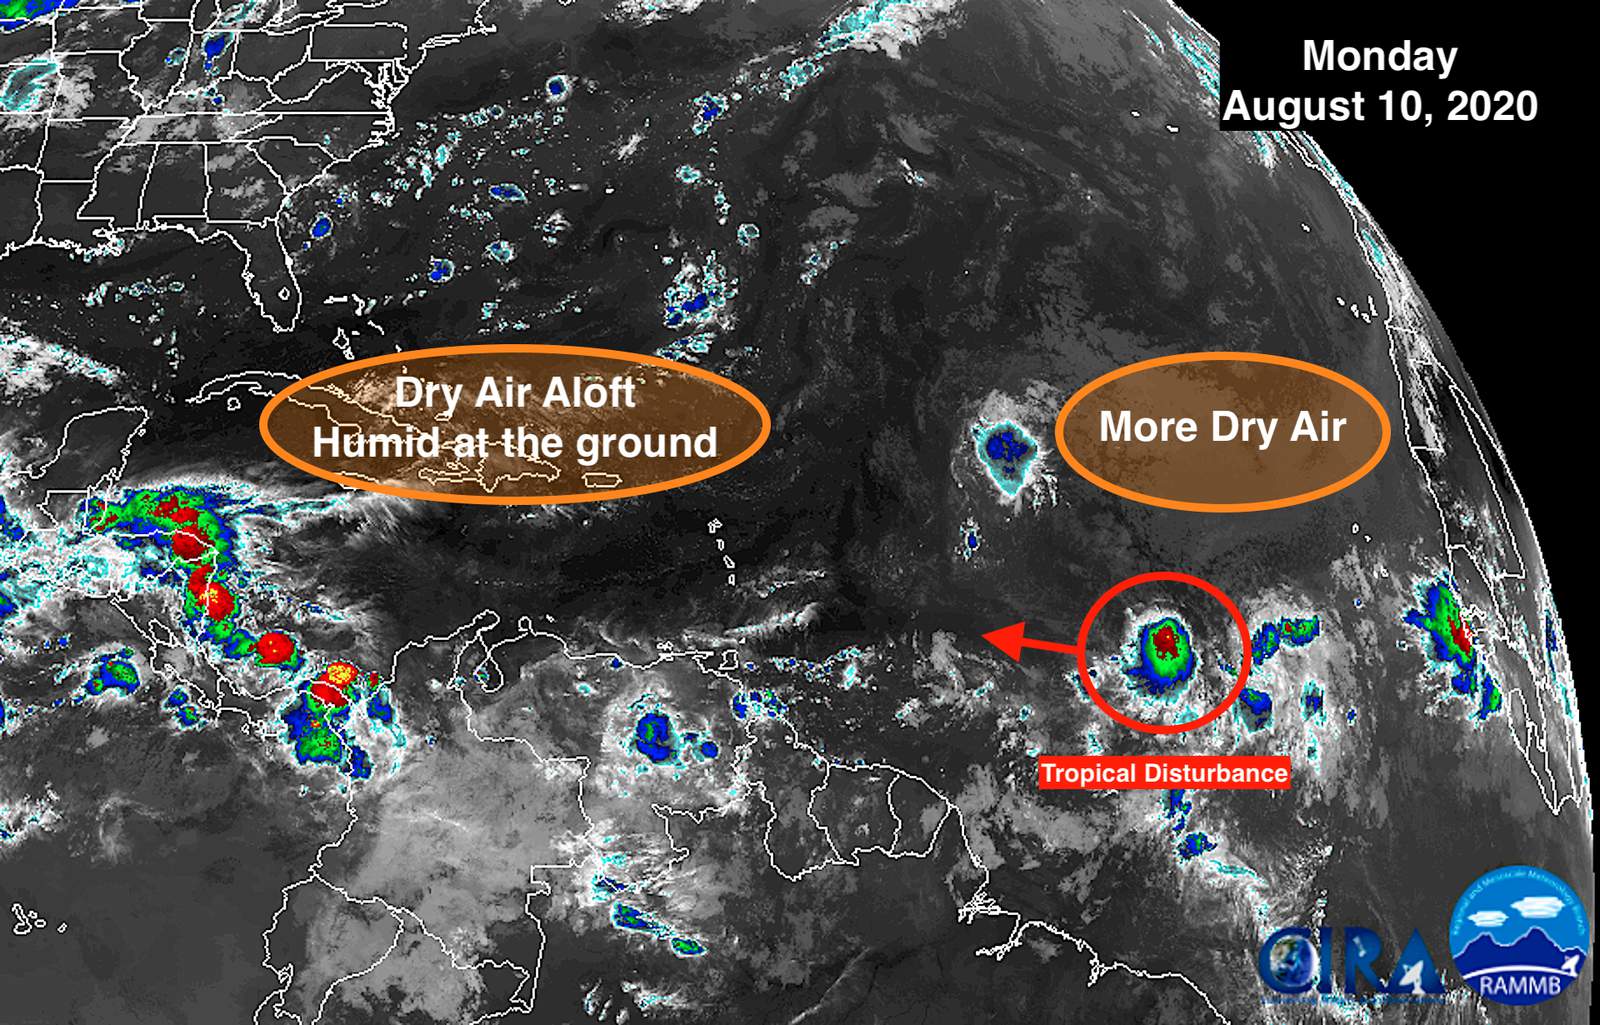 Norcross: A disturbance to watch far out in Atlantic, but dry air still dominates the tropics